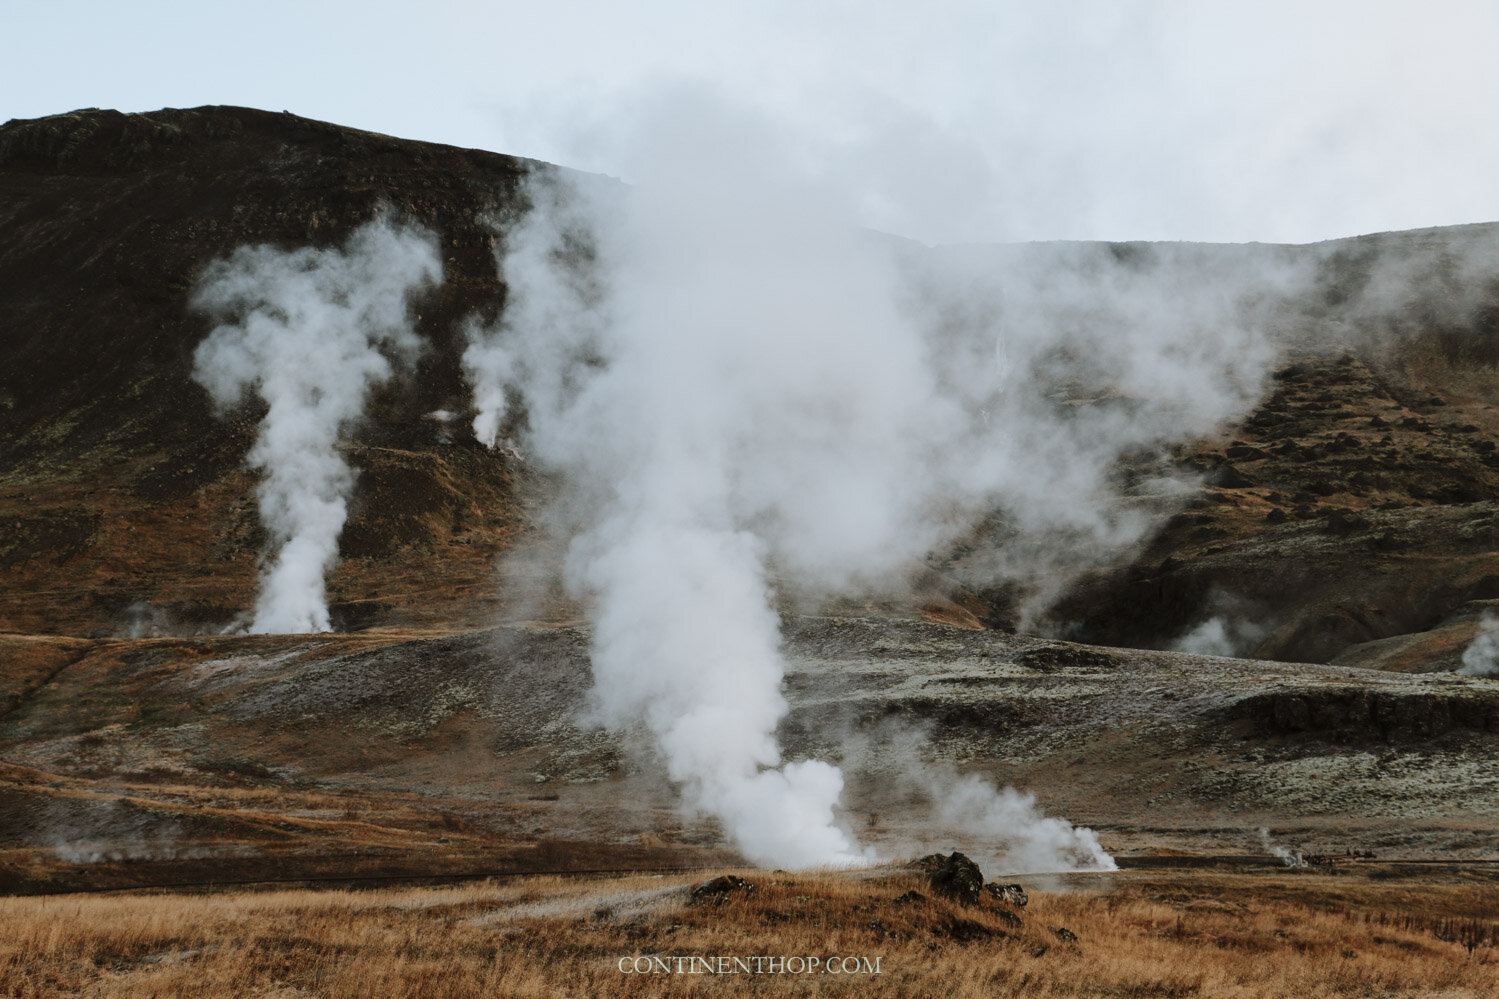 A fumarole field with steam escaping from gas vents as seen on an Iceland 6 day itinerary